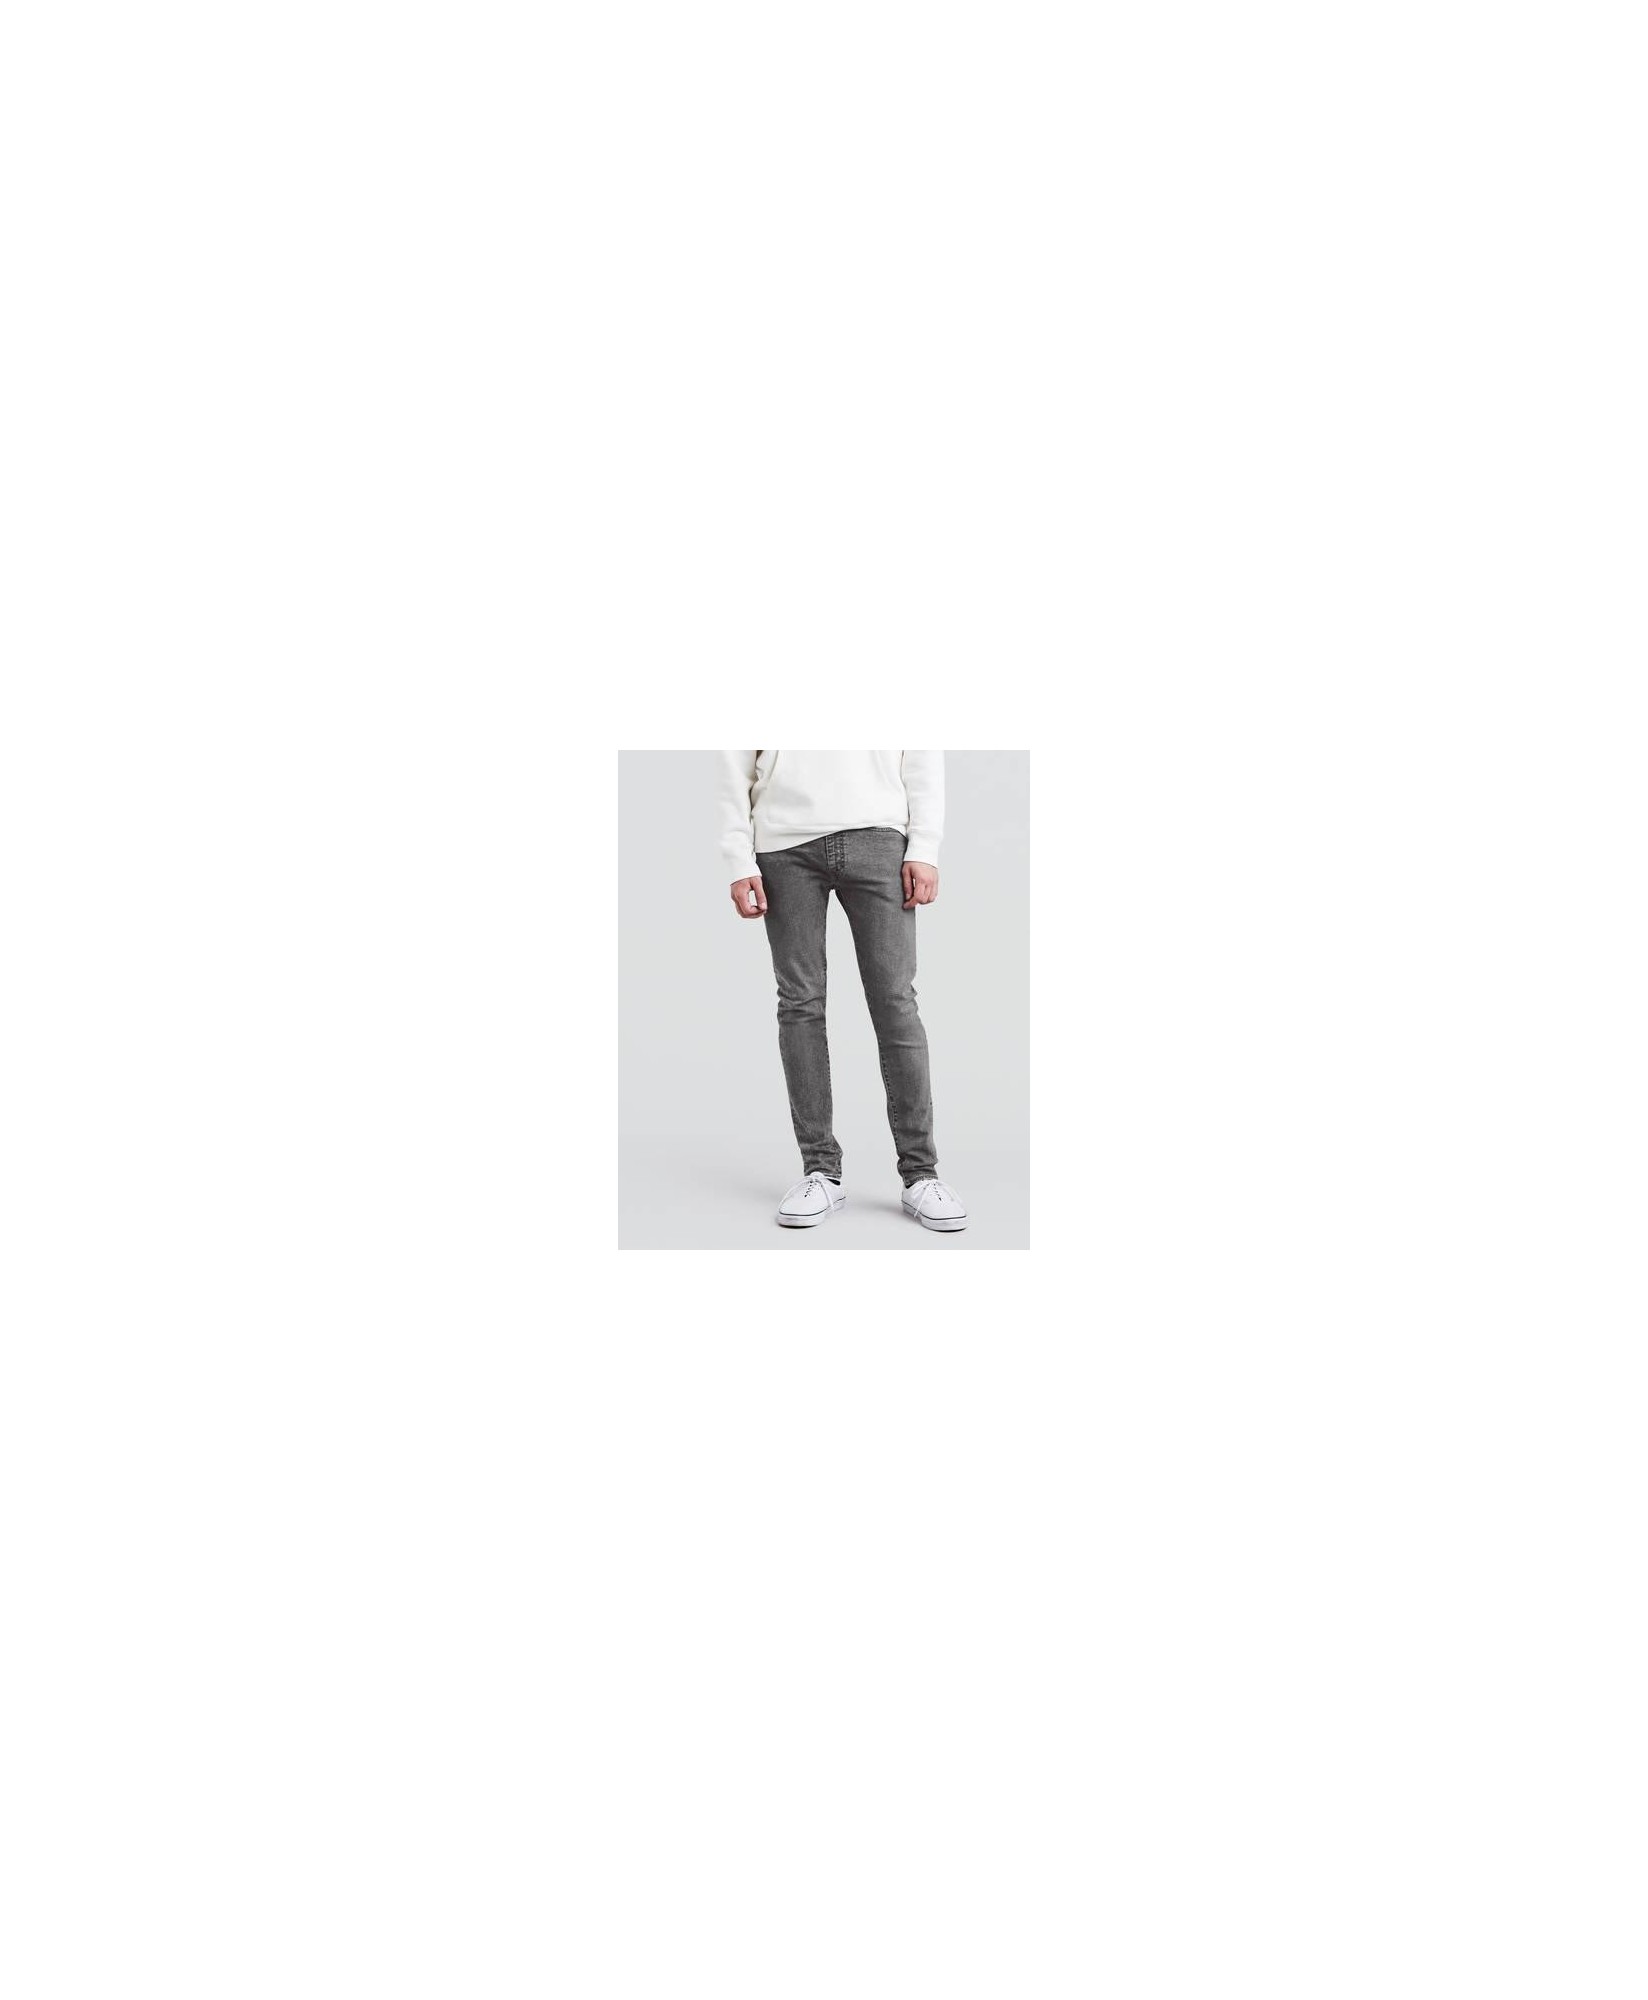 519™ EXTREME SKINNY FIT JEANS- ADVANCED STRETCH